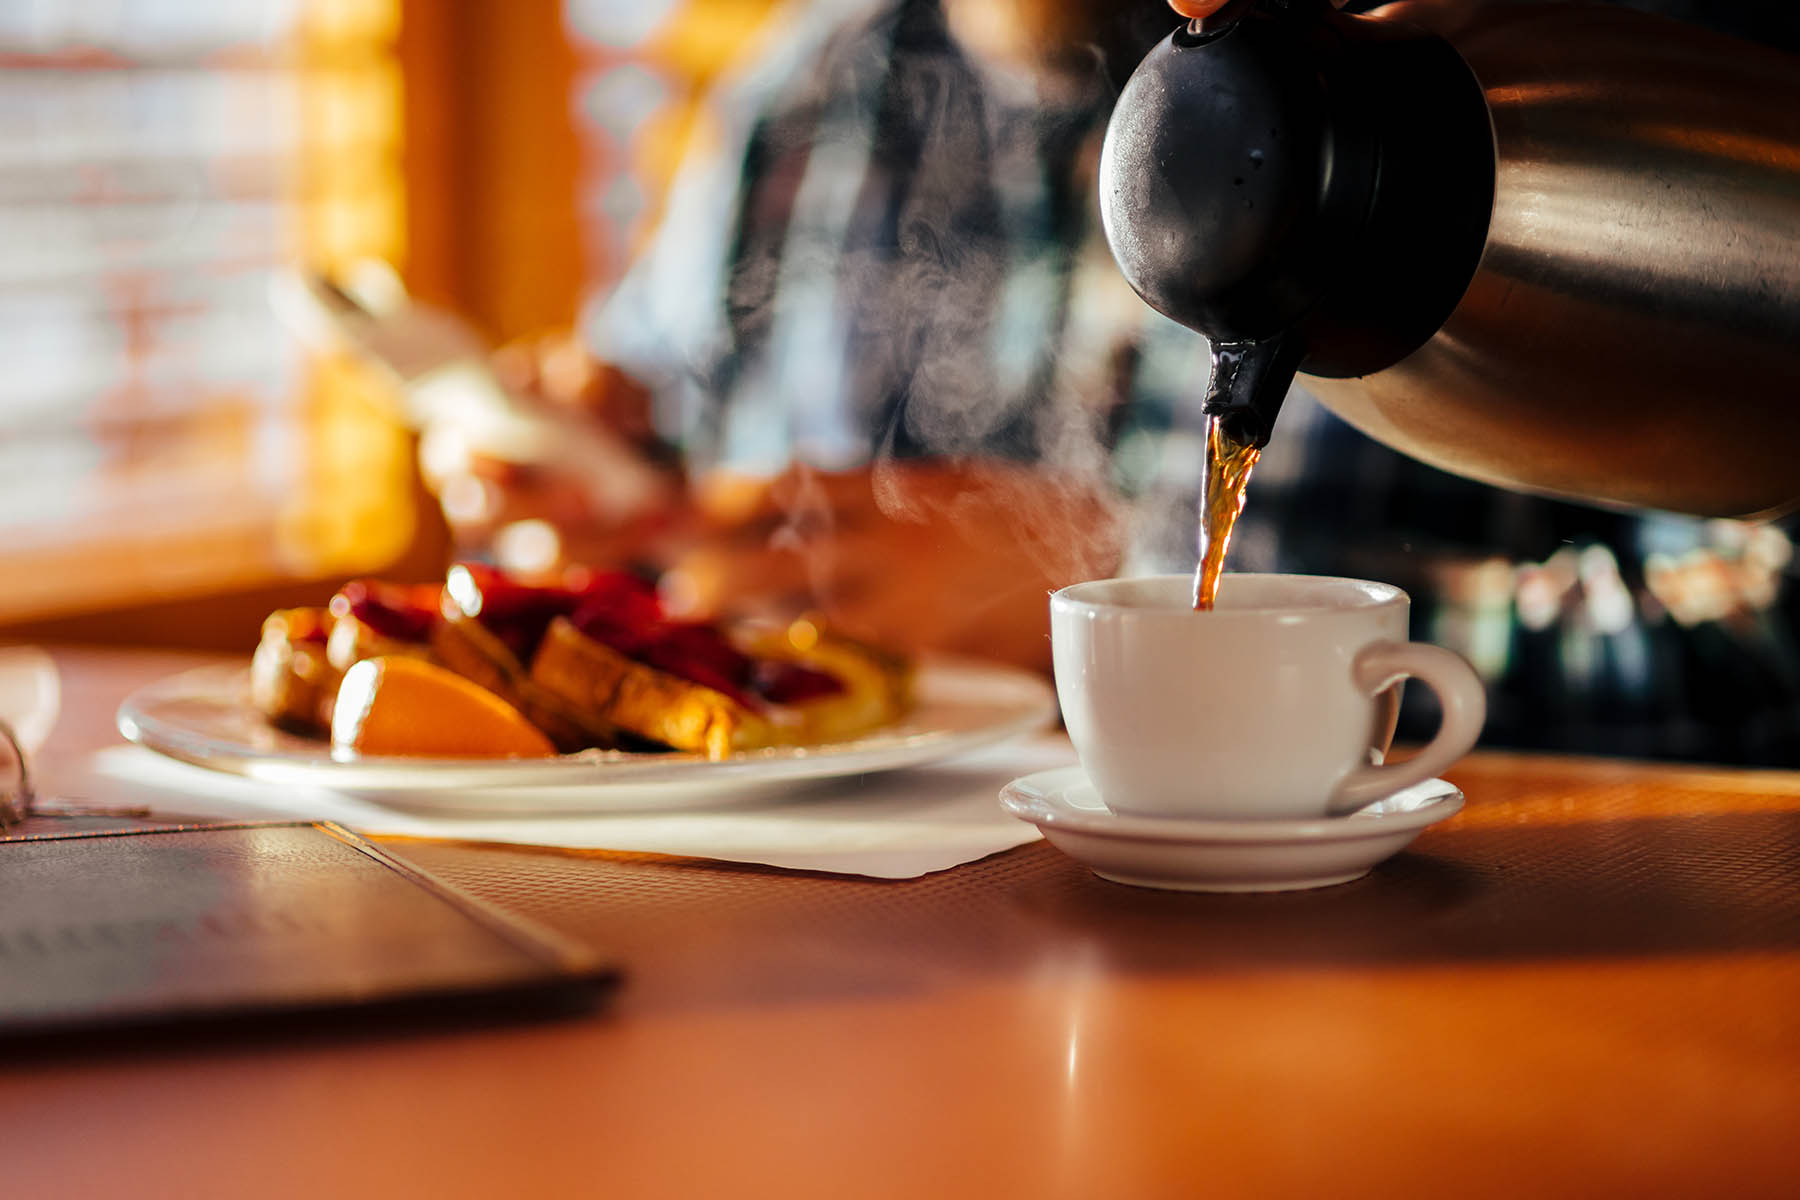 Best Breakfast Spots Near Hocking Hills: Recommendations for starting your day with a delicious breakfast before exploring.